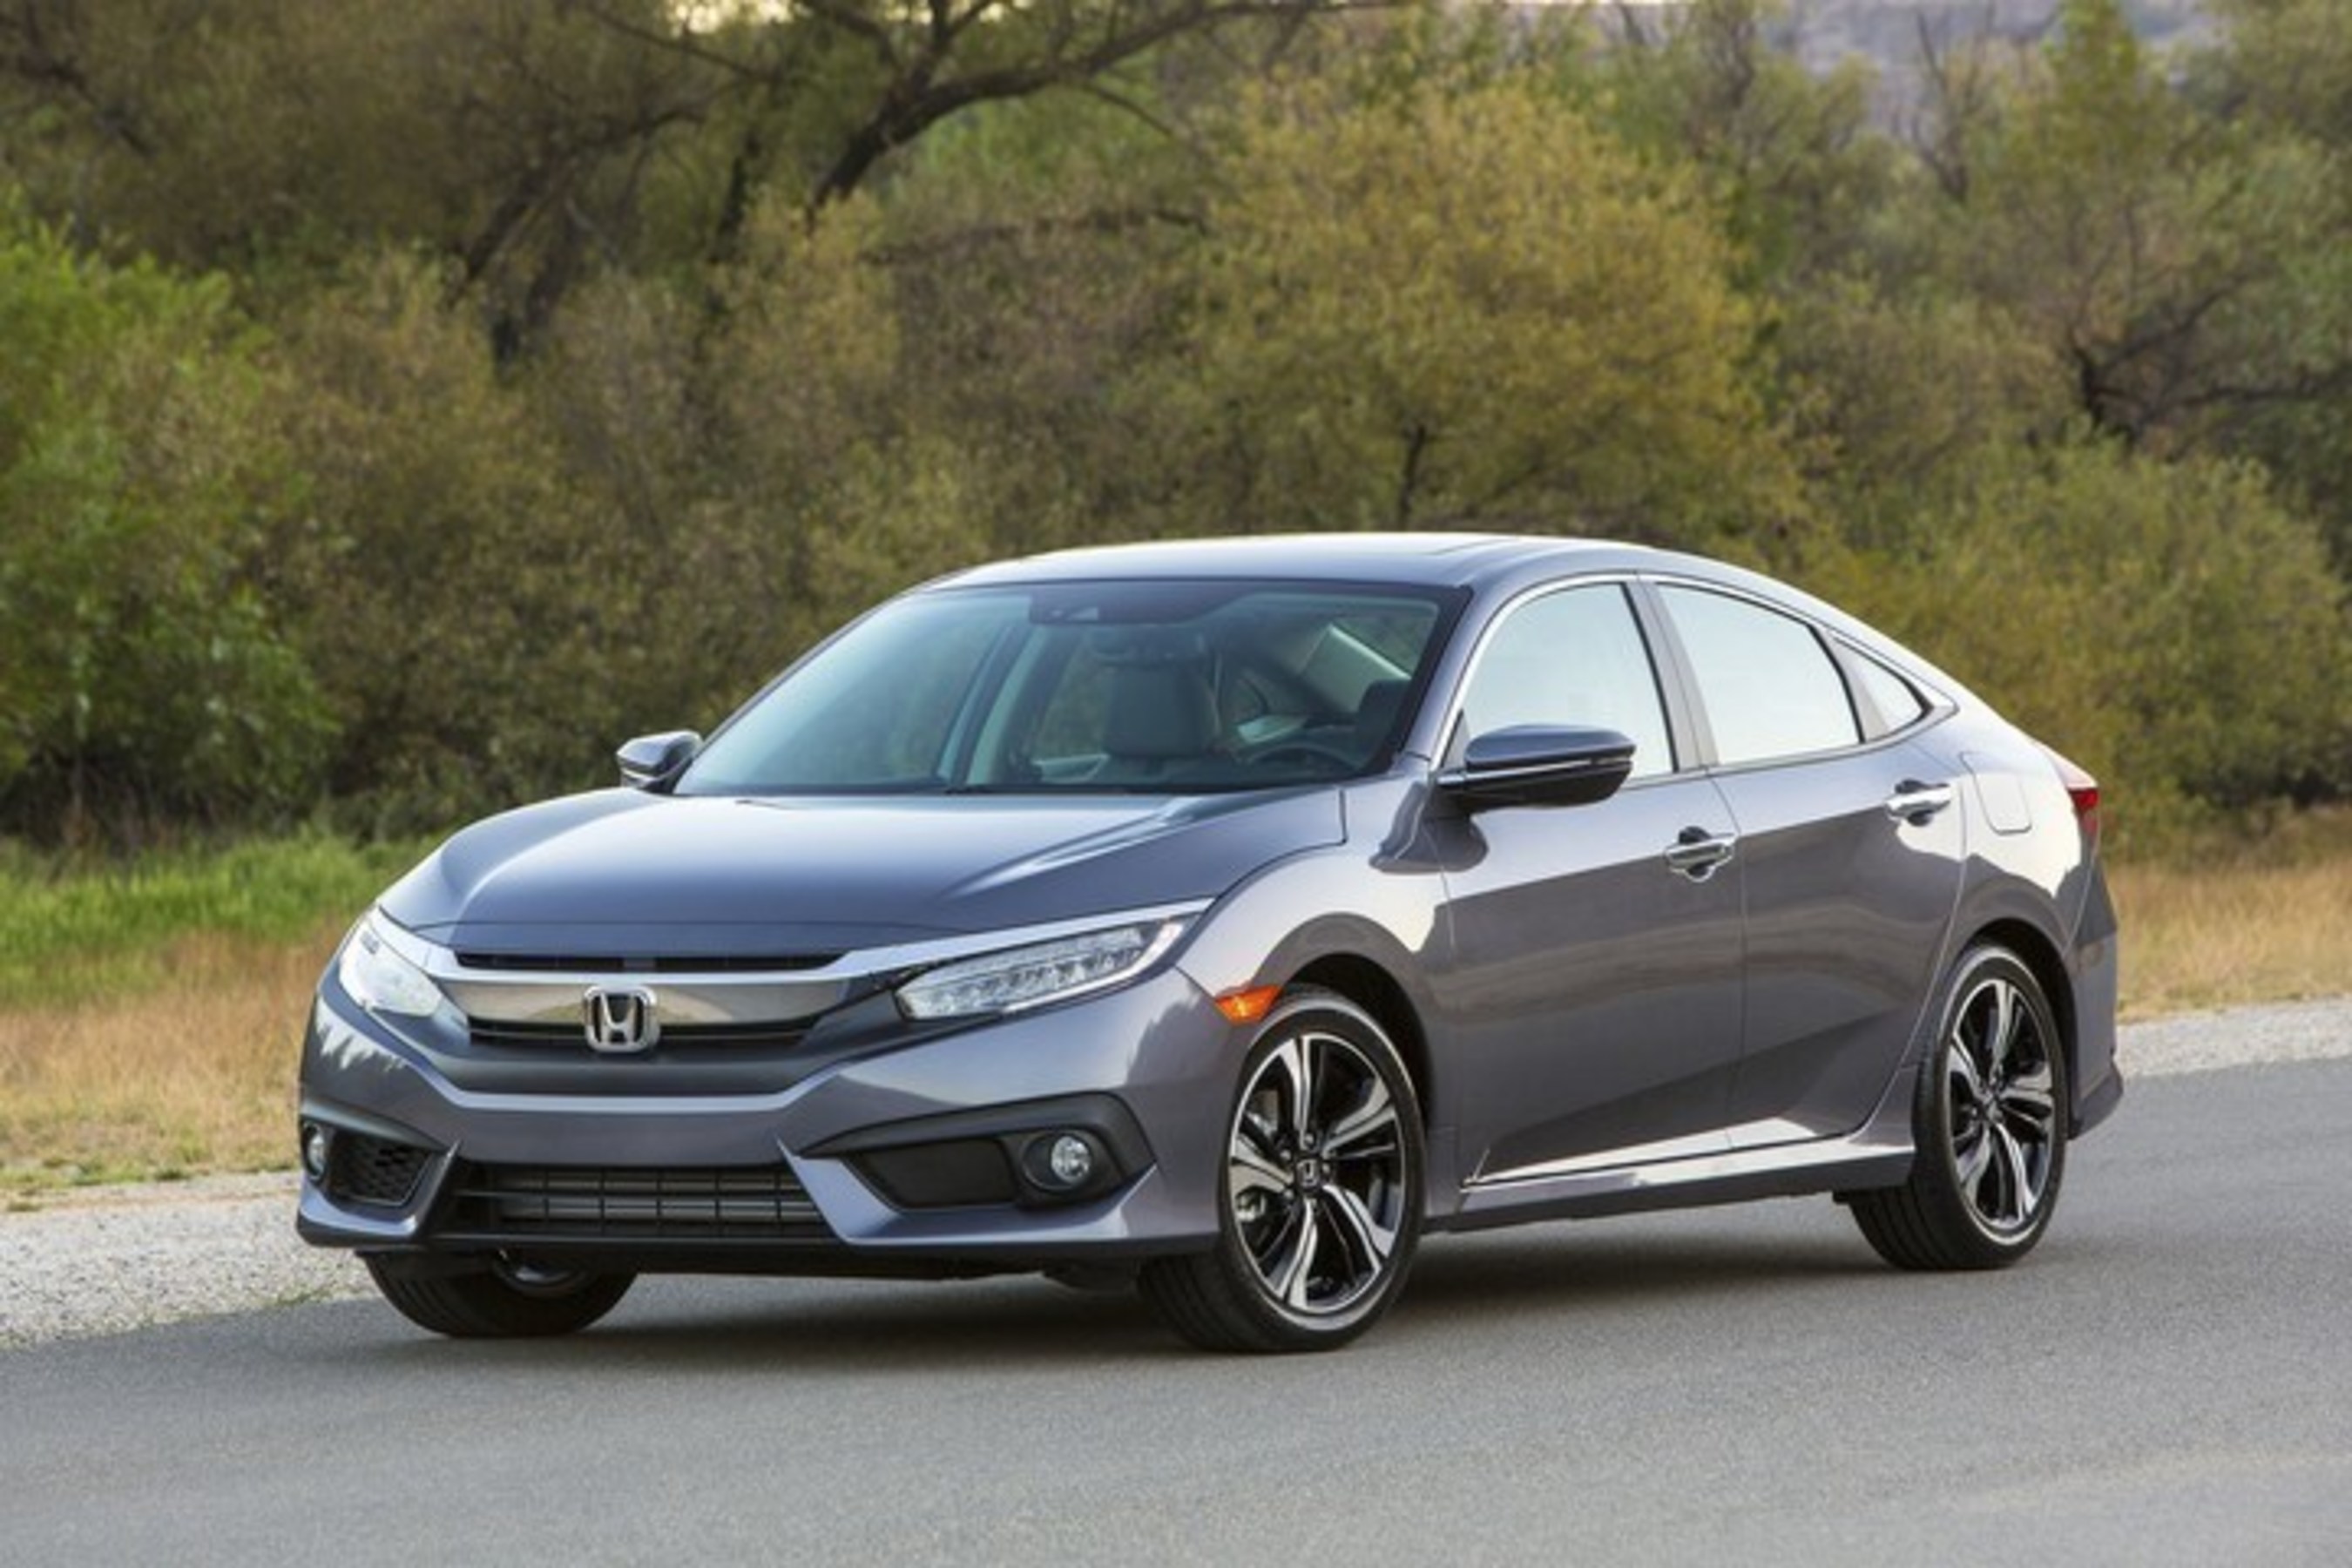 2017 Civic Lineup Turbocharged with Extended Availability of Manual  Transmission